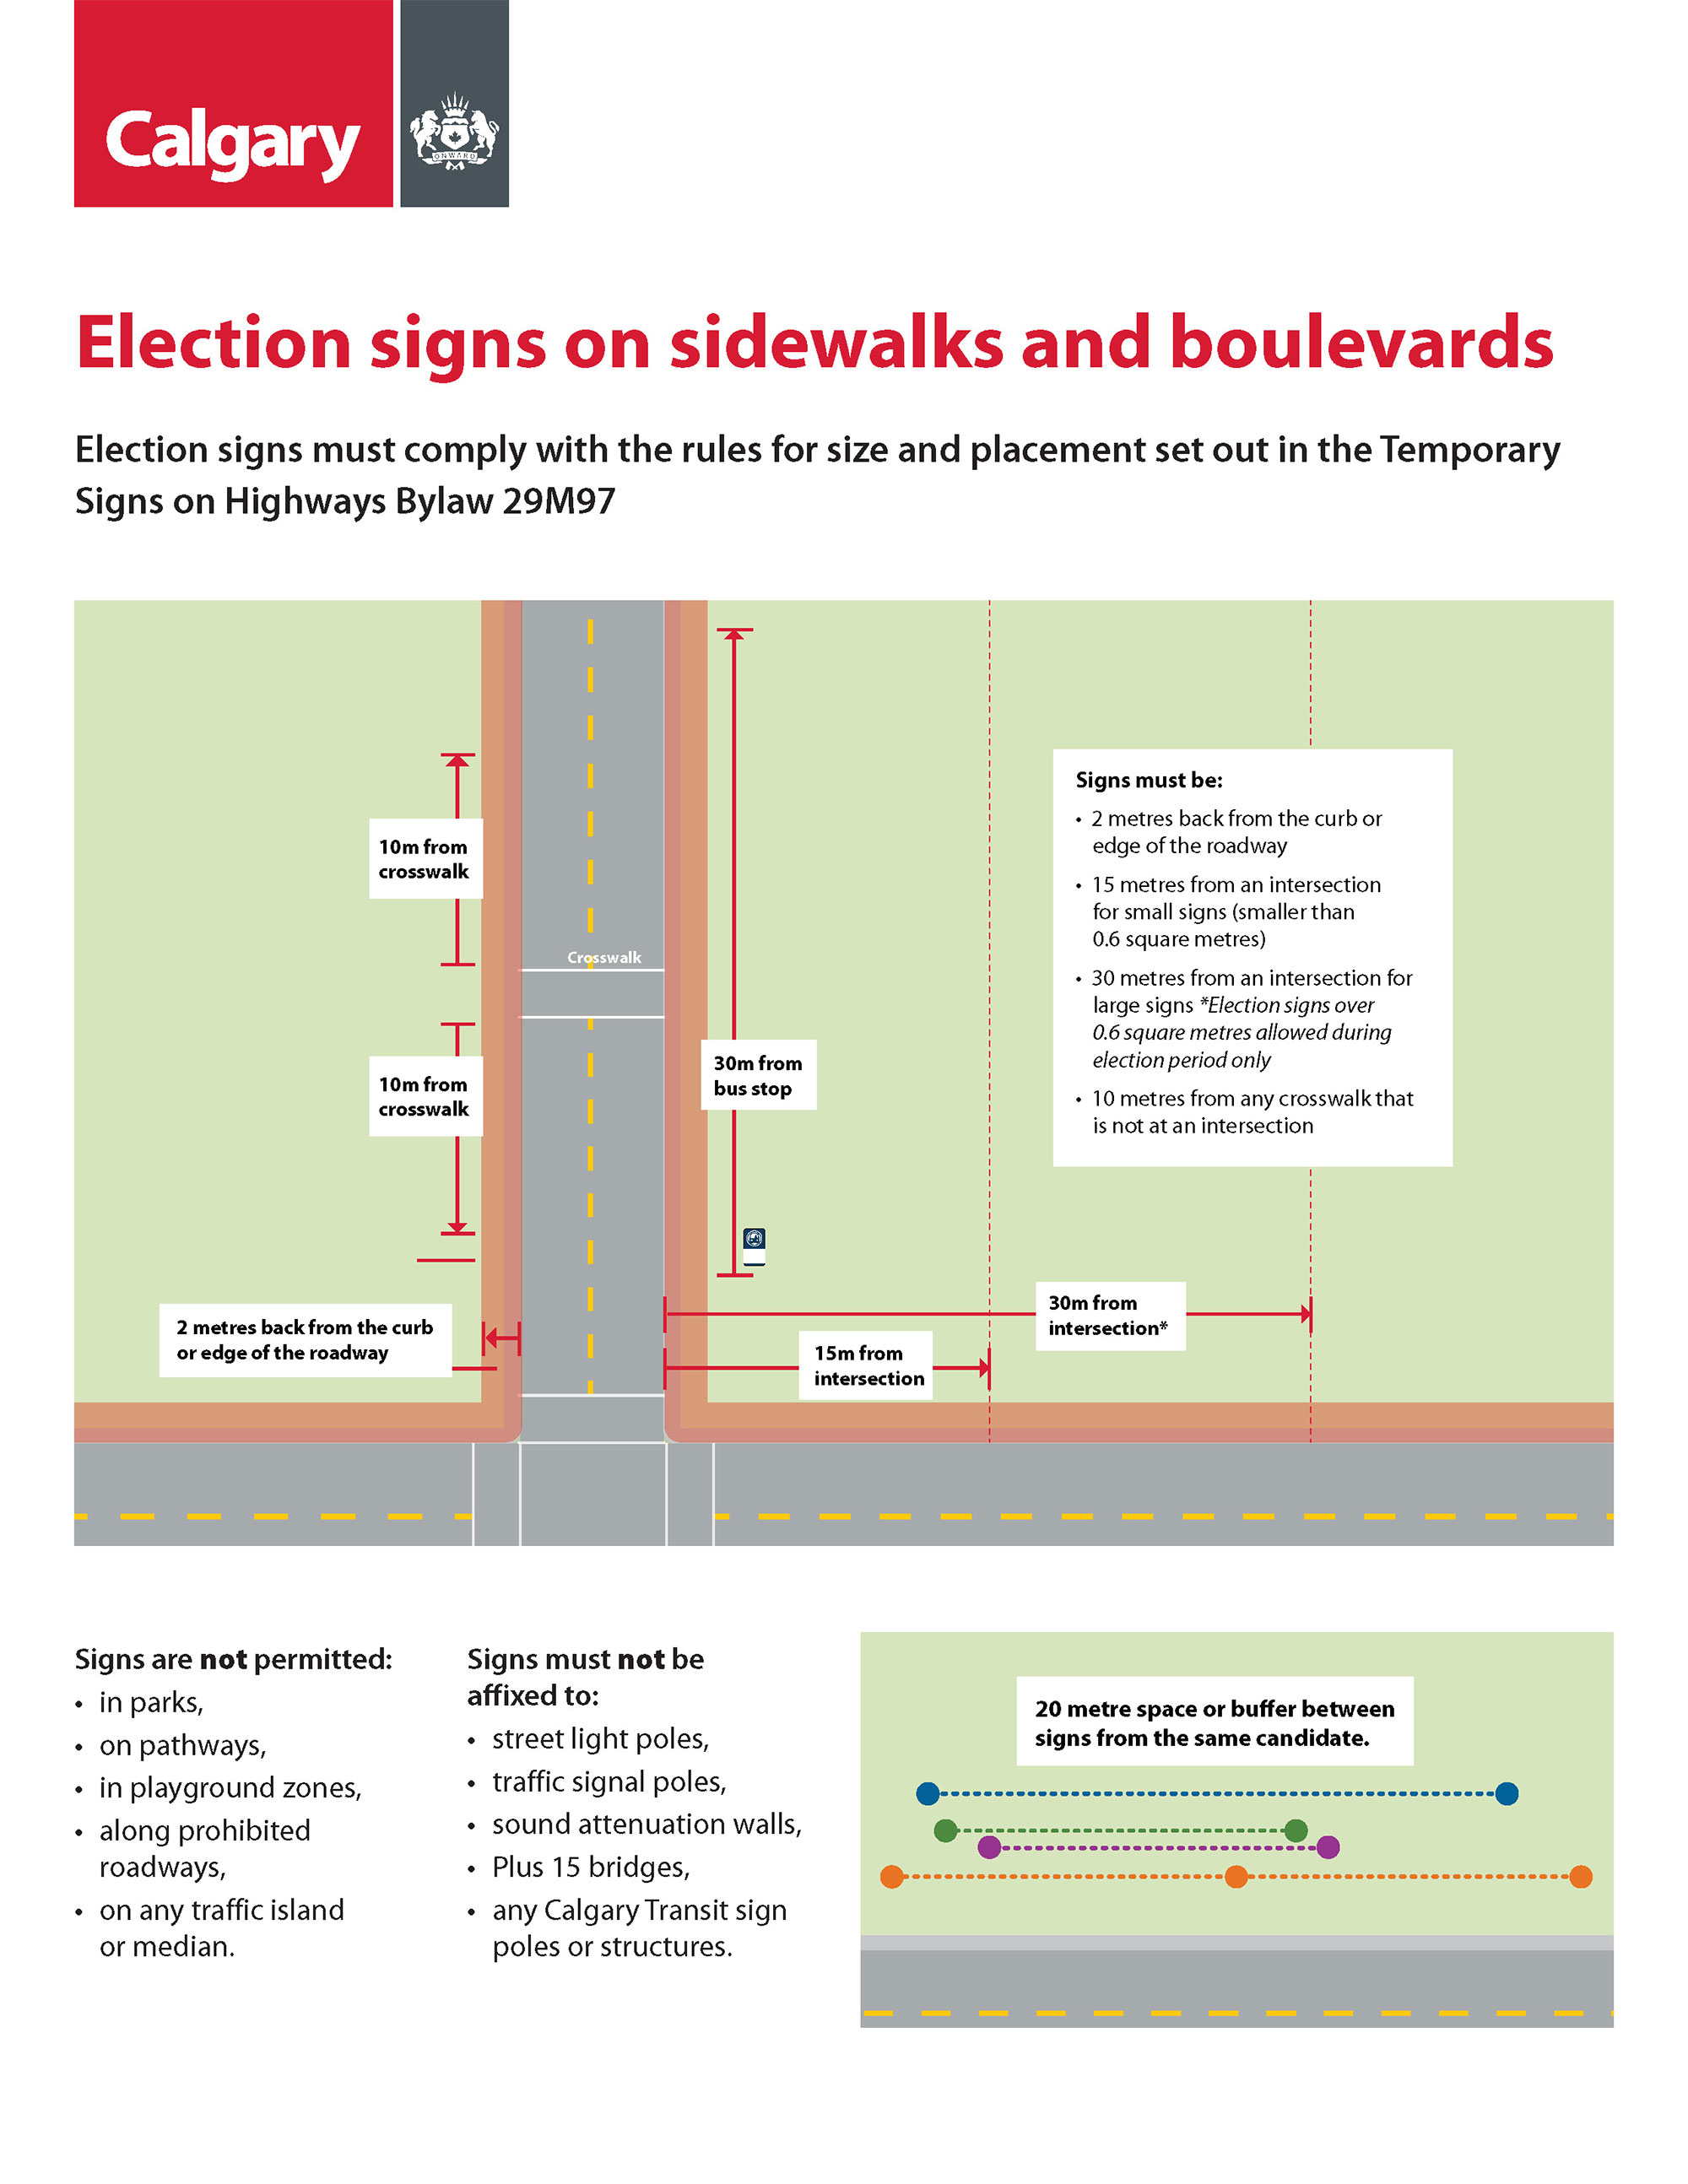 Bylaws Related To Election Signs 